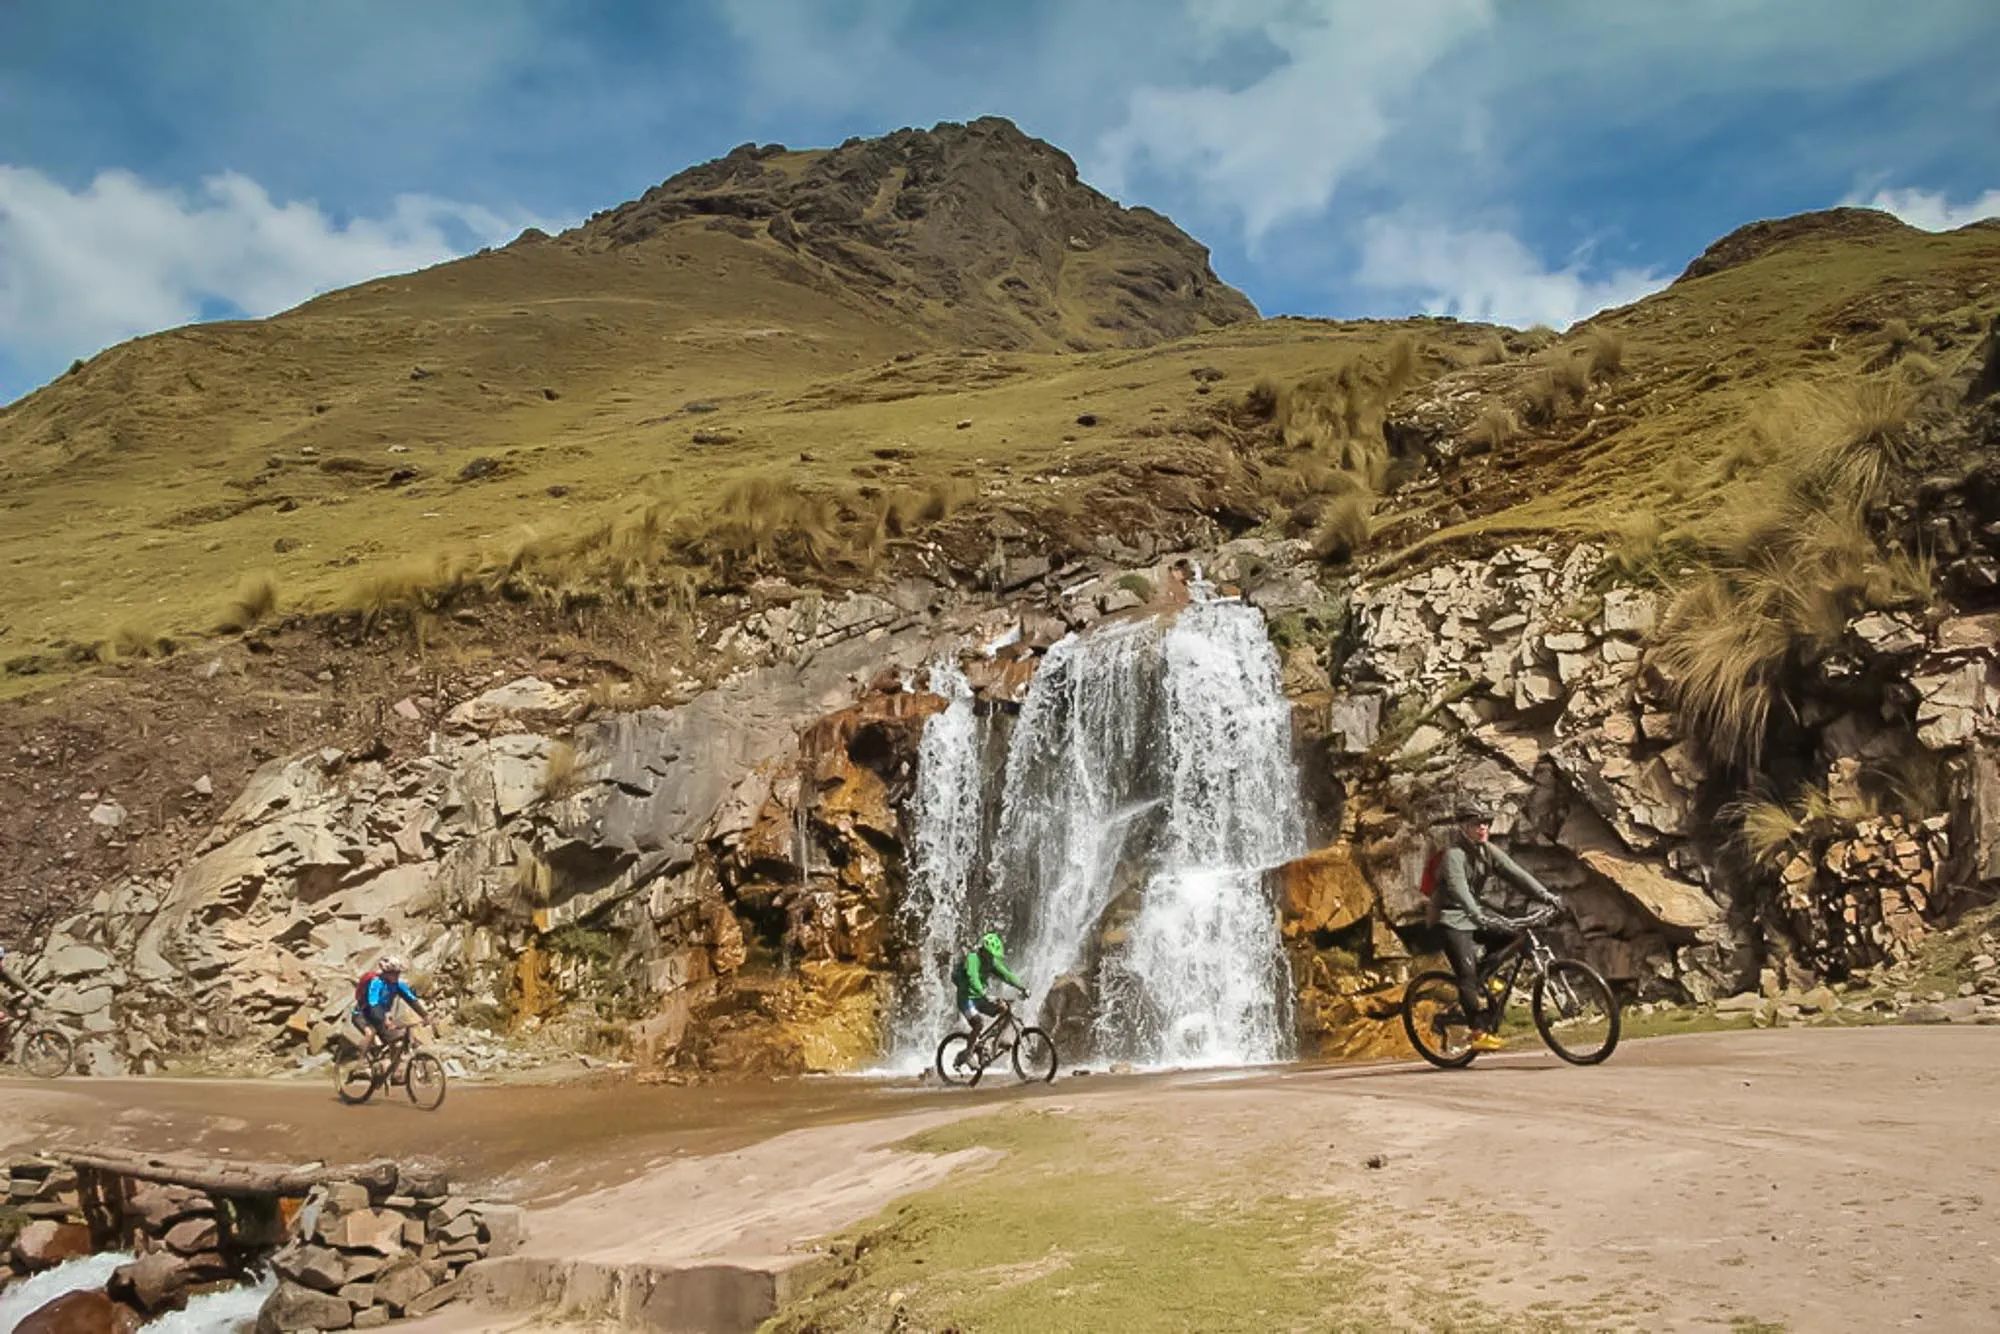 Cyclists passing a waterfall in the Peruvian Andes.